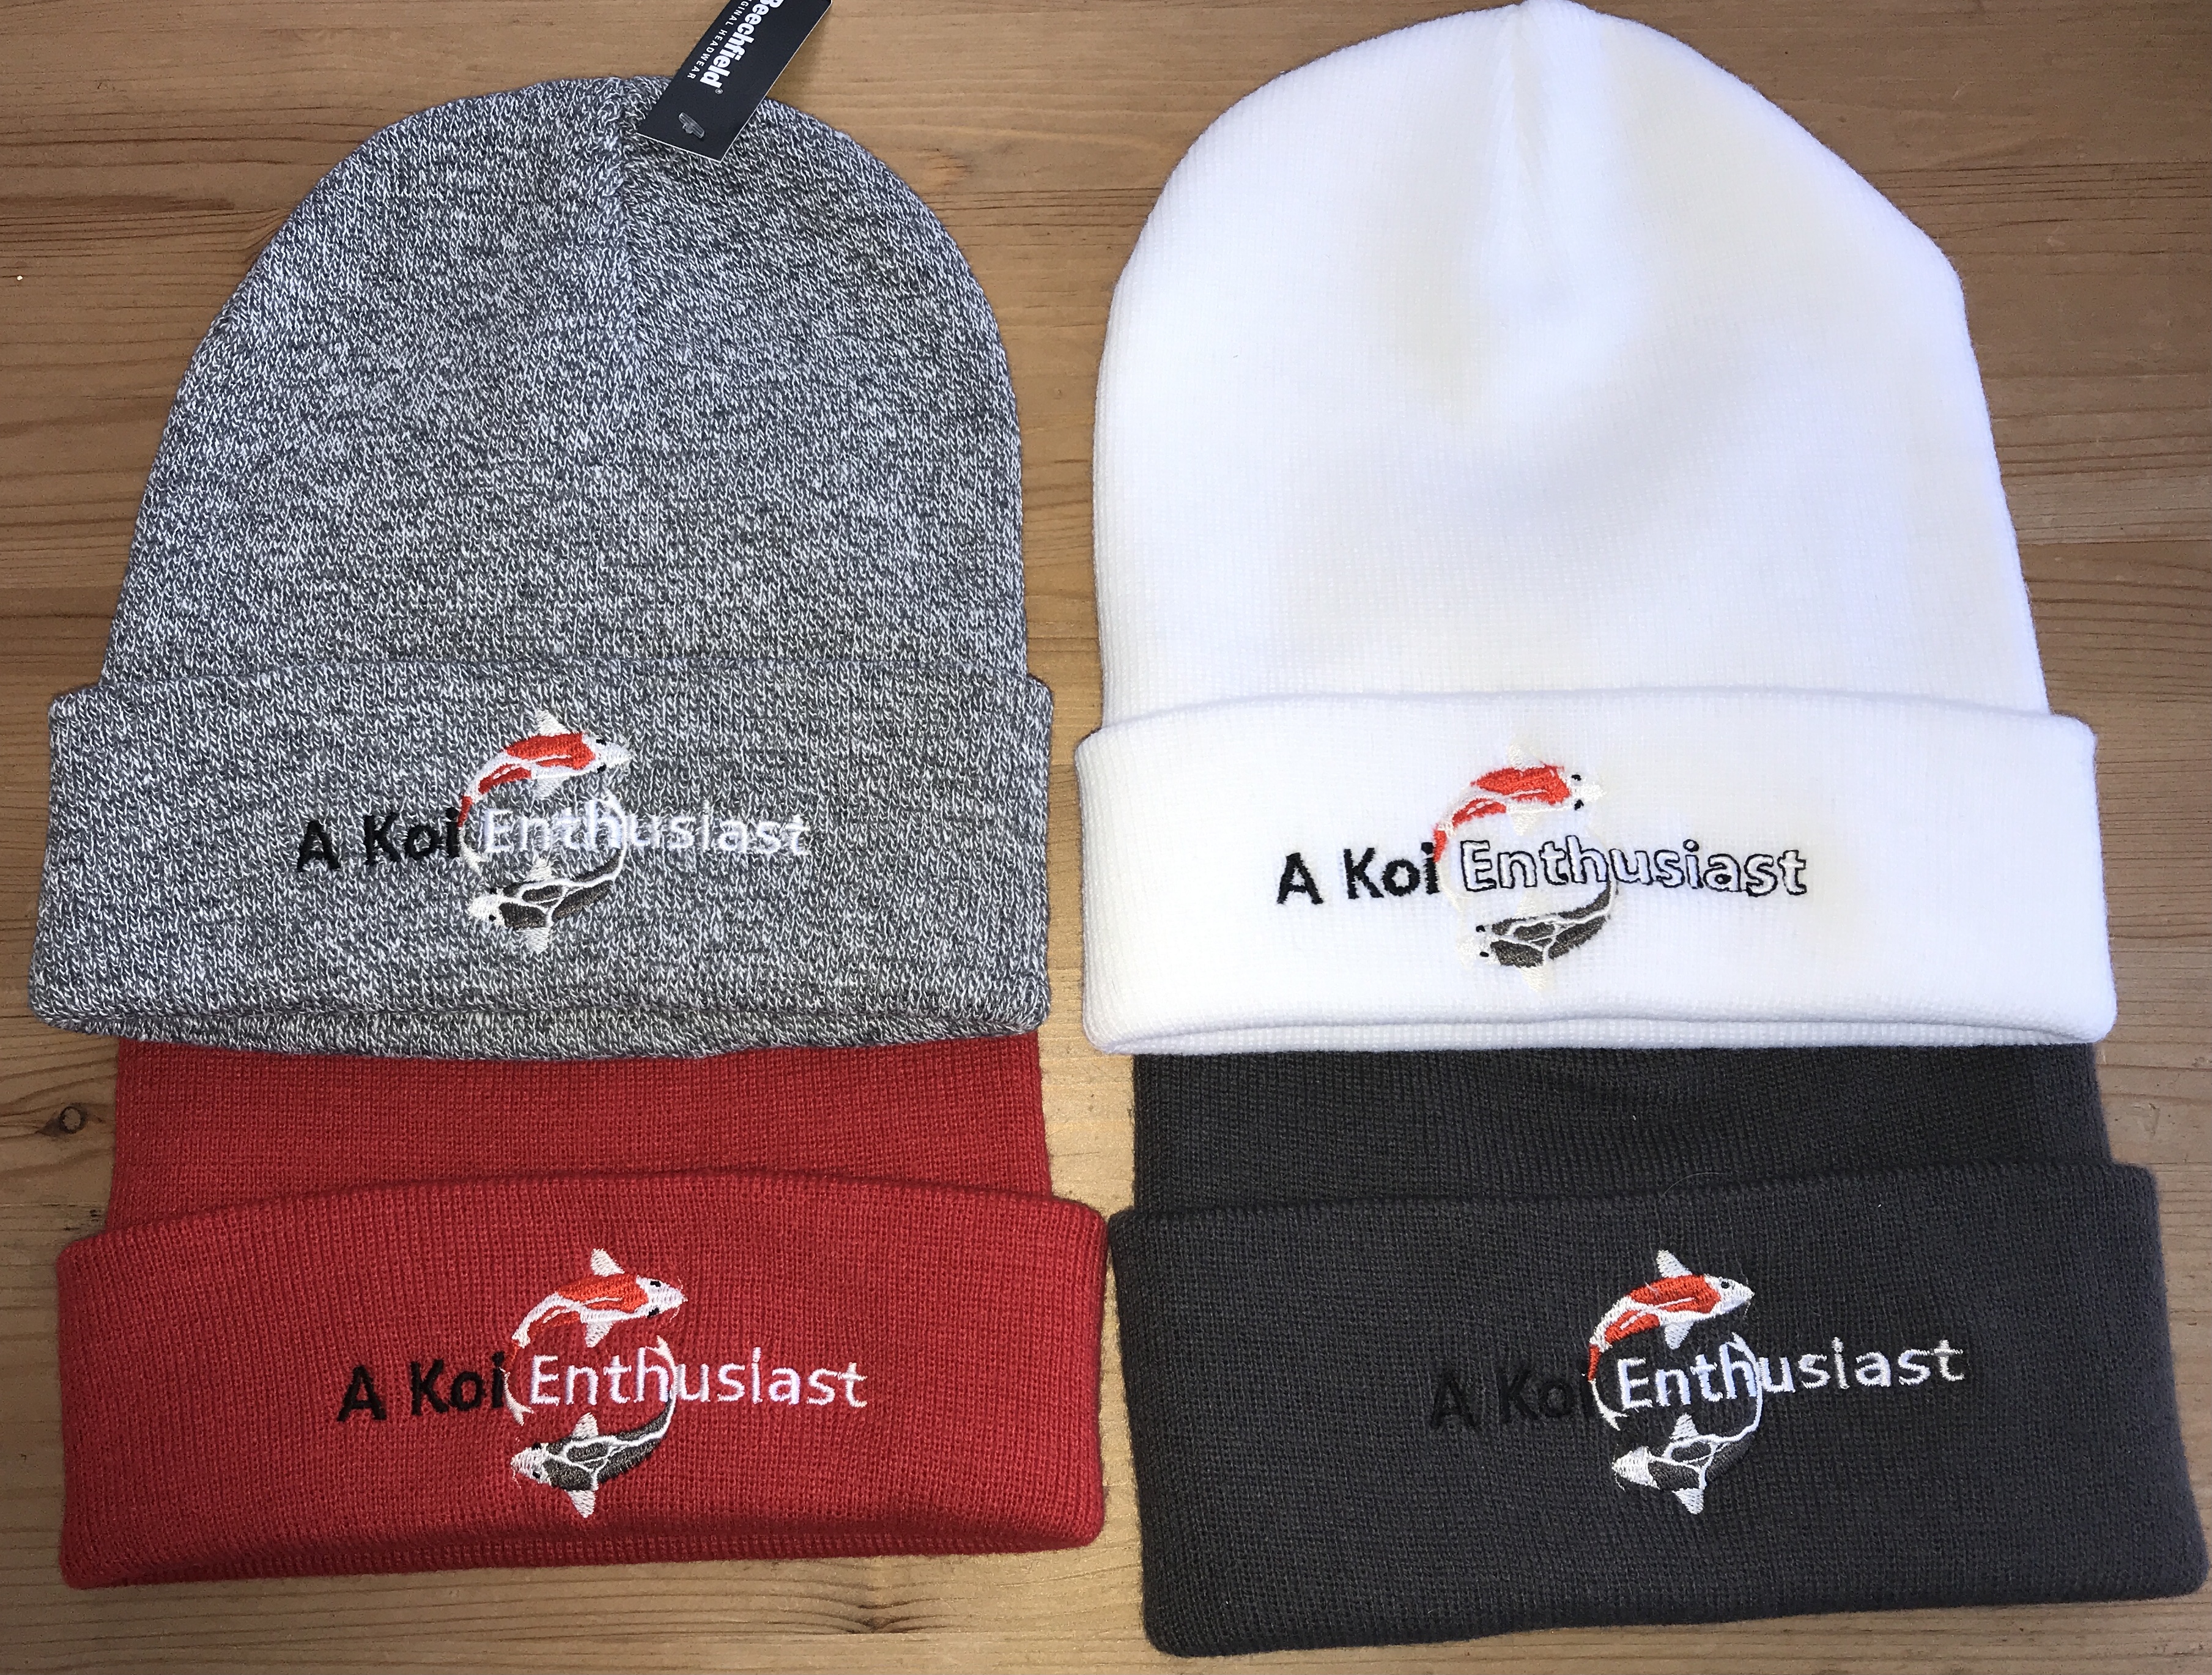 Red Classic "A Koi Enthusiast" Embroidered Beanie